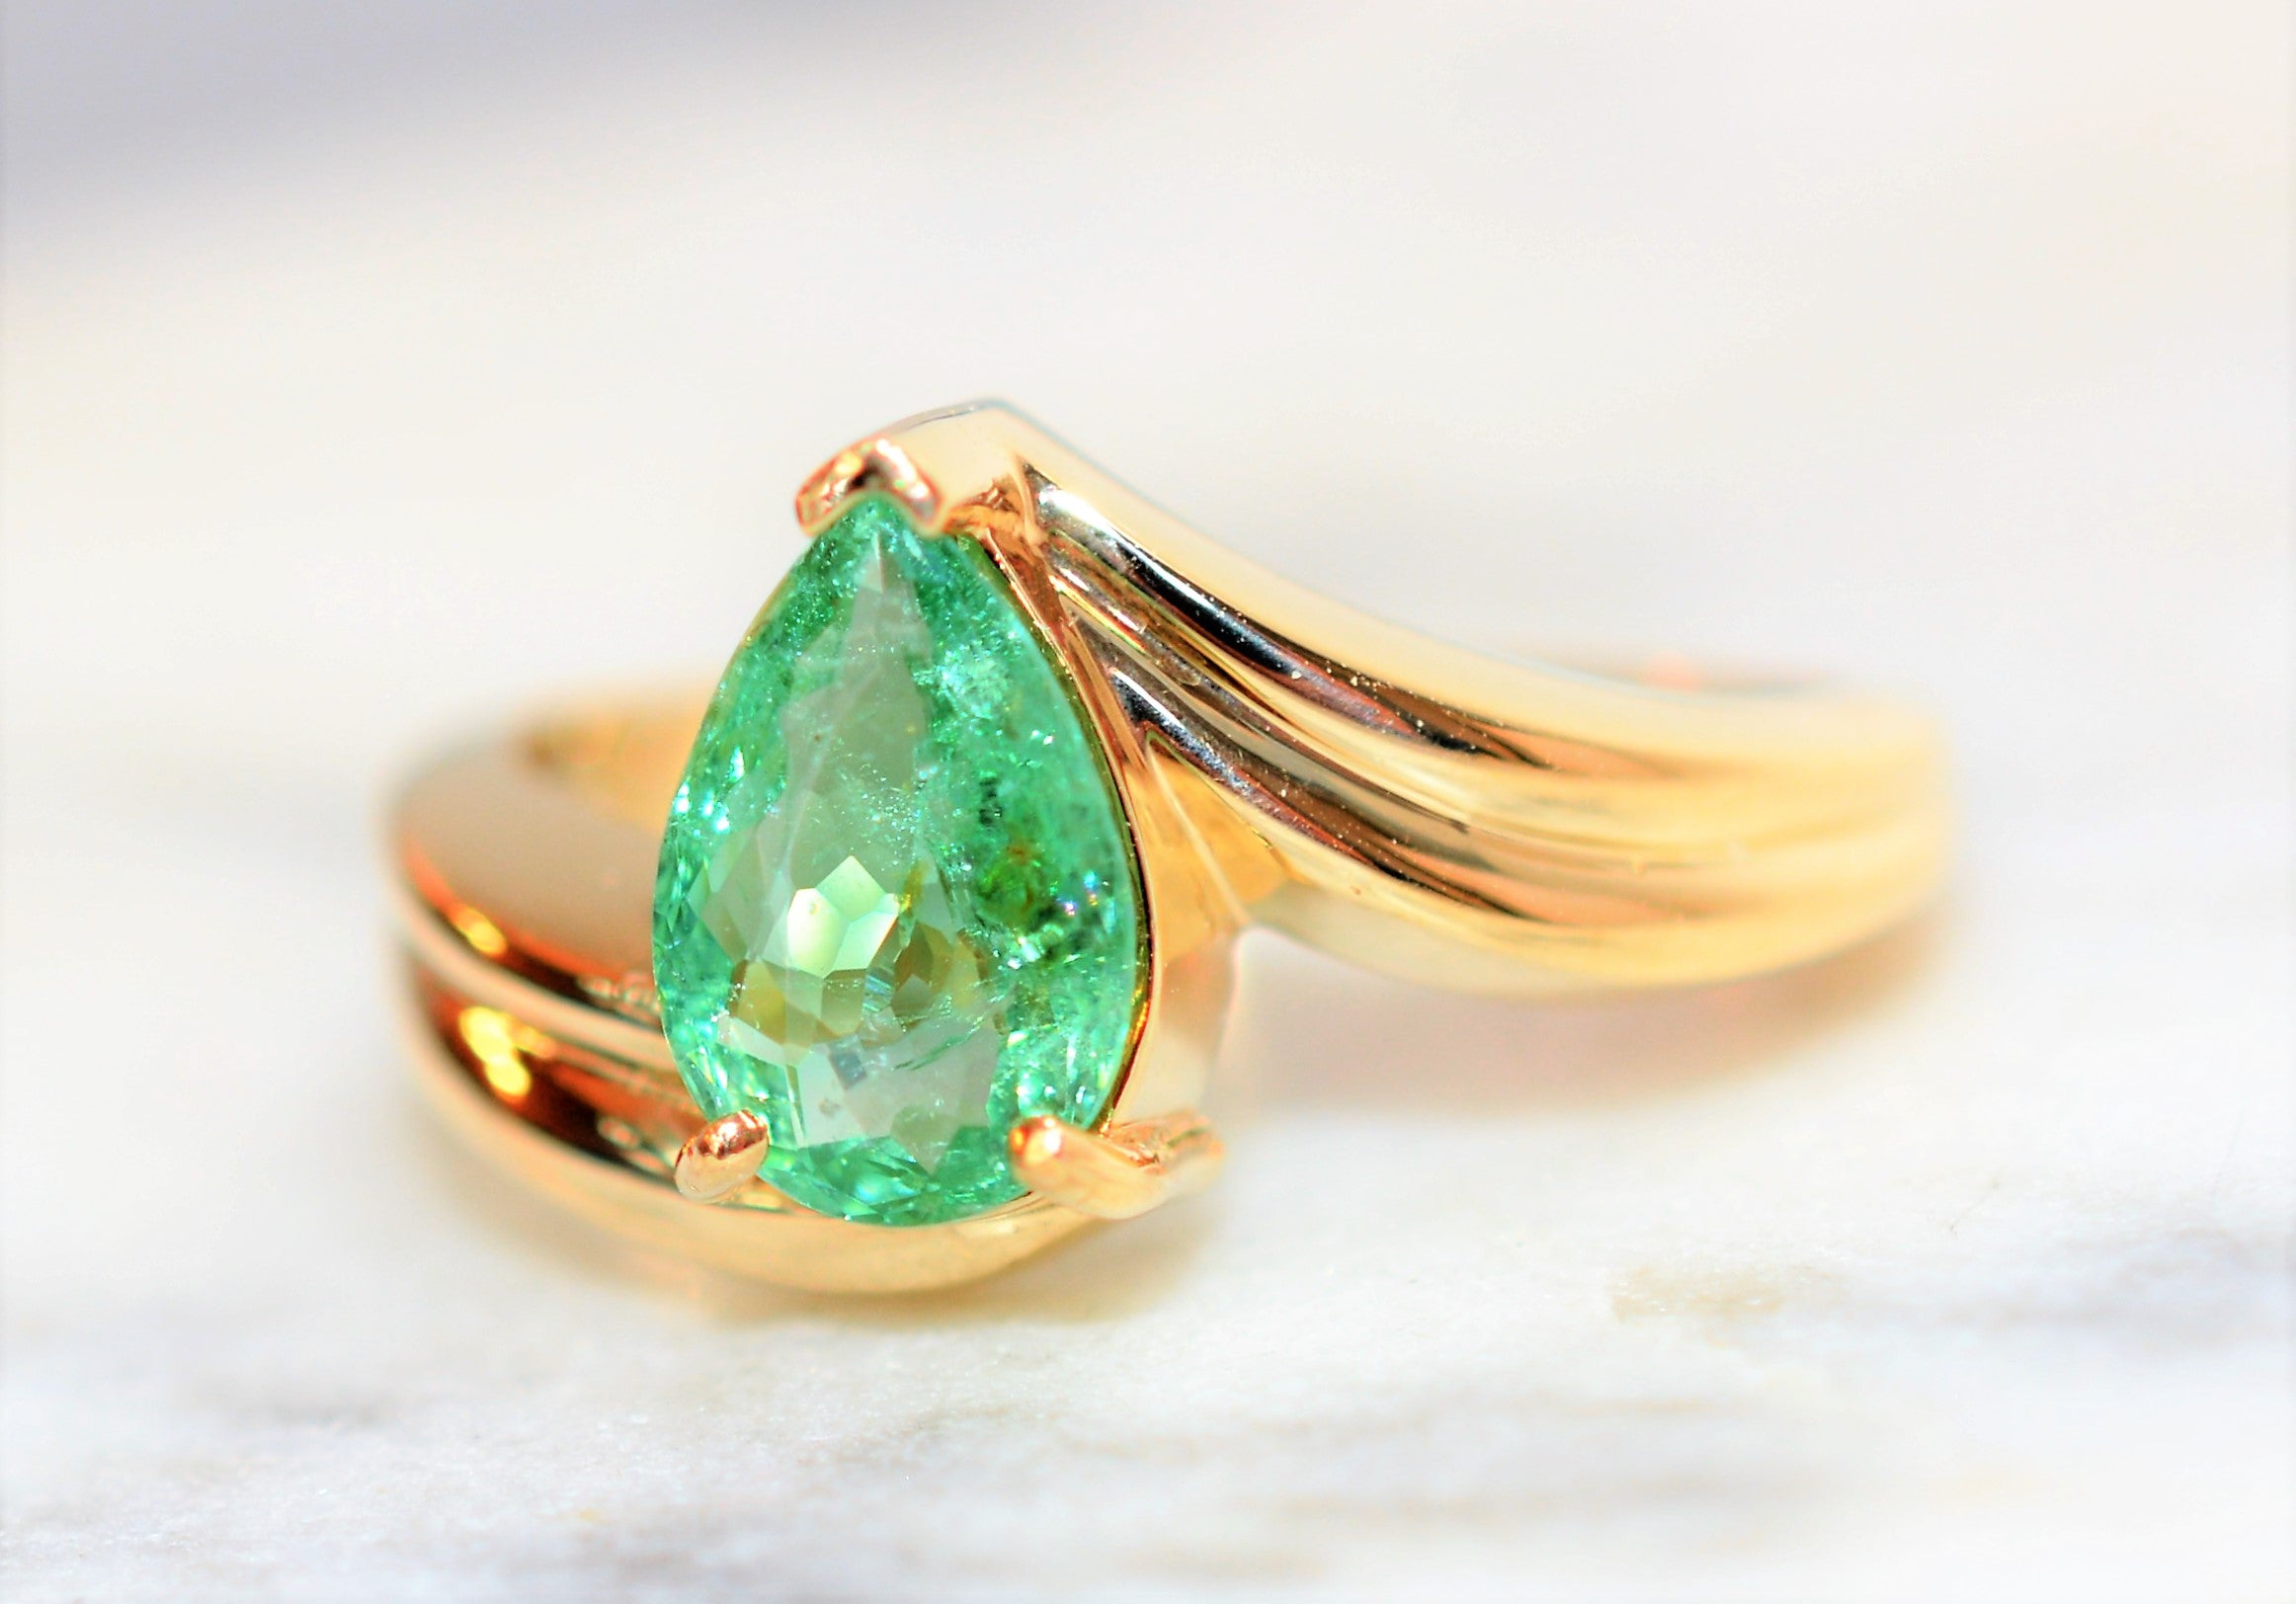 Natural Paraiba Tourmaline Ring 10K Solid Gold 1.27ct Solitaire Ring Pear Ring Gemstone Ring Women's Ring Ladies Ring Statement Ring Jewelry